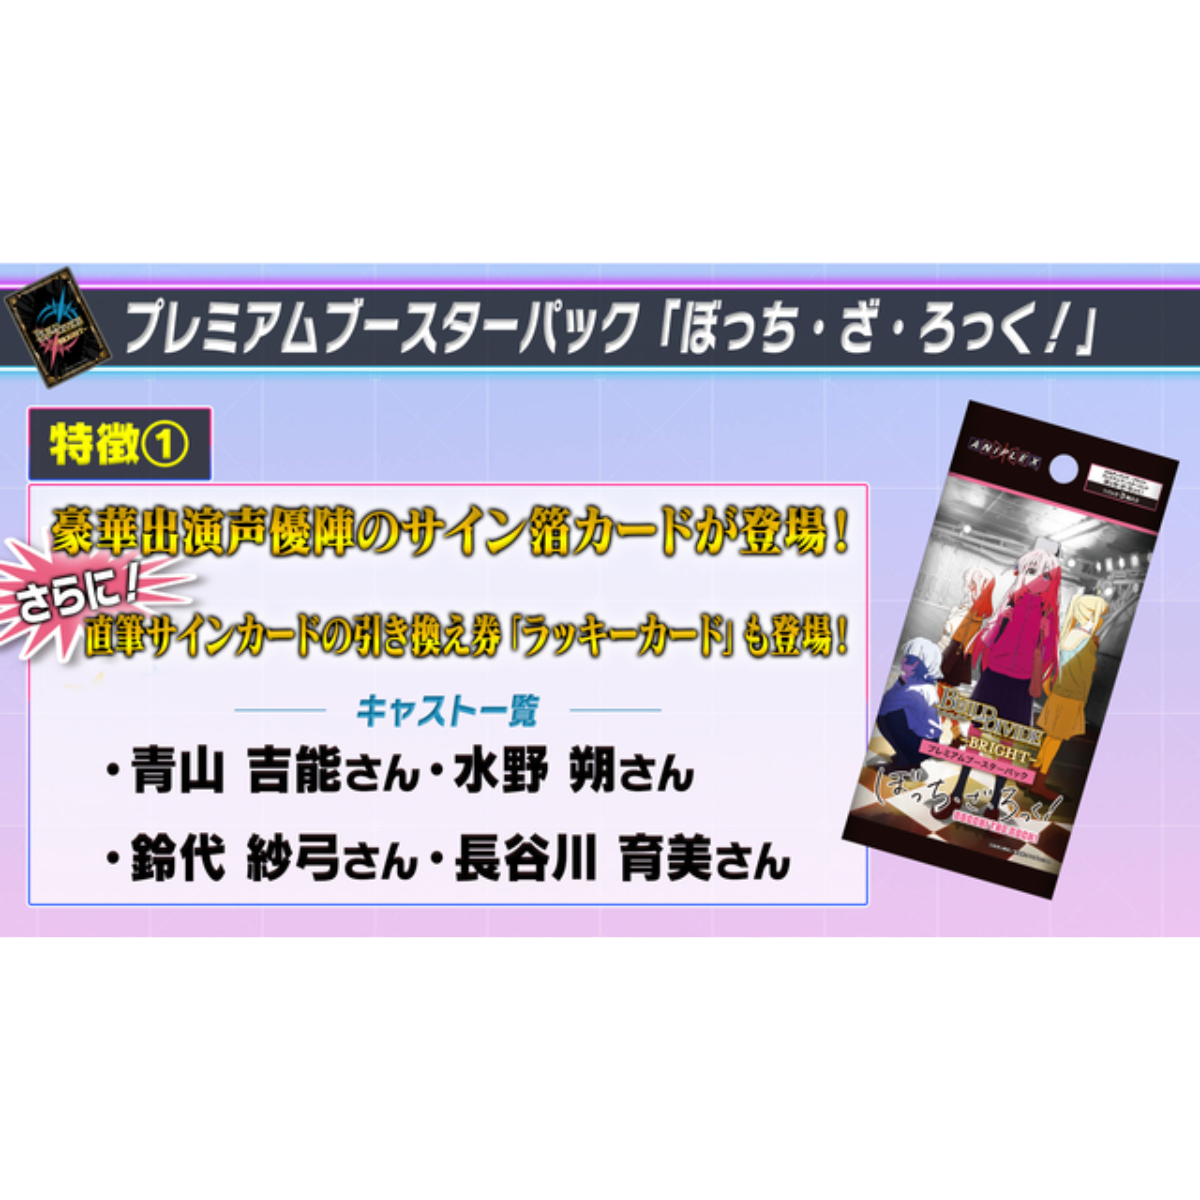 Build Divide -Bright- Premium Booster &quot;Bocchi The Rock&quot; (Japanese)-Booster Pack (Random)-Aniplex-Ace Cards &amp; Collectibles